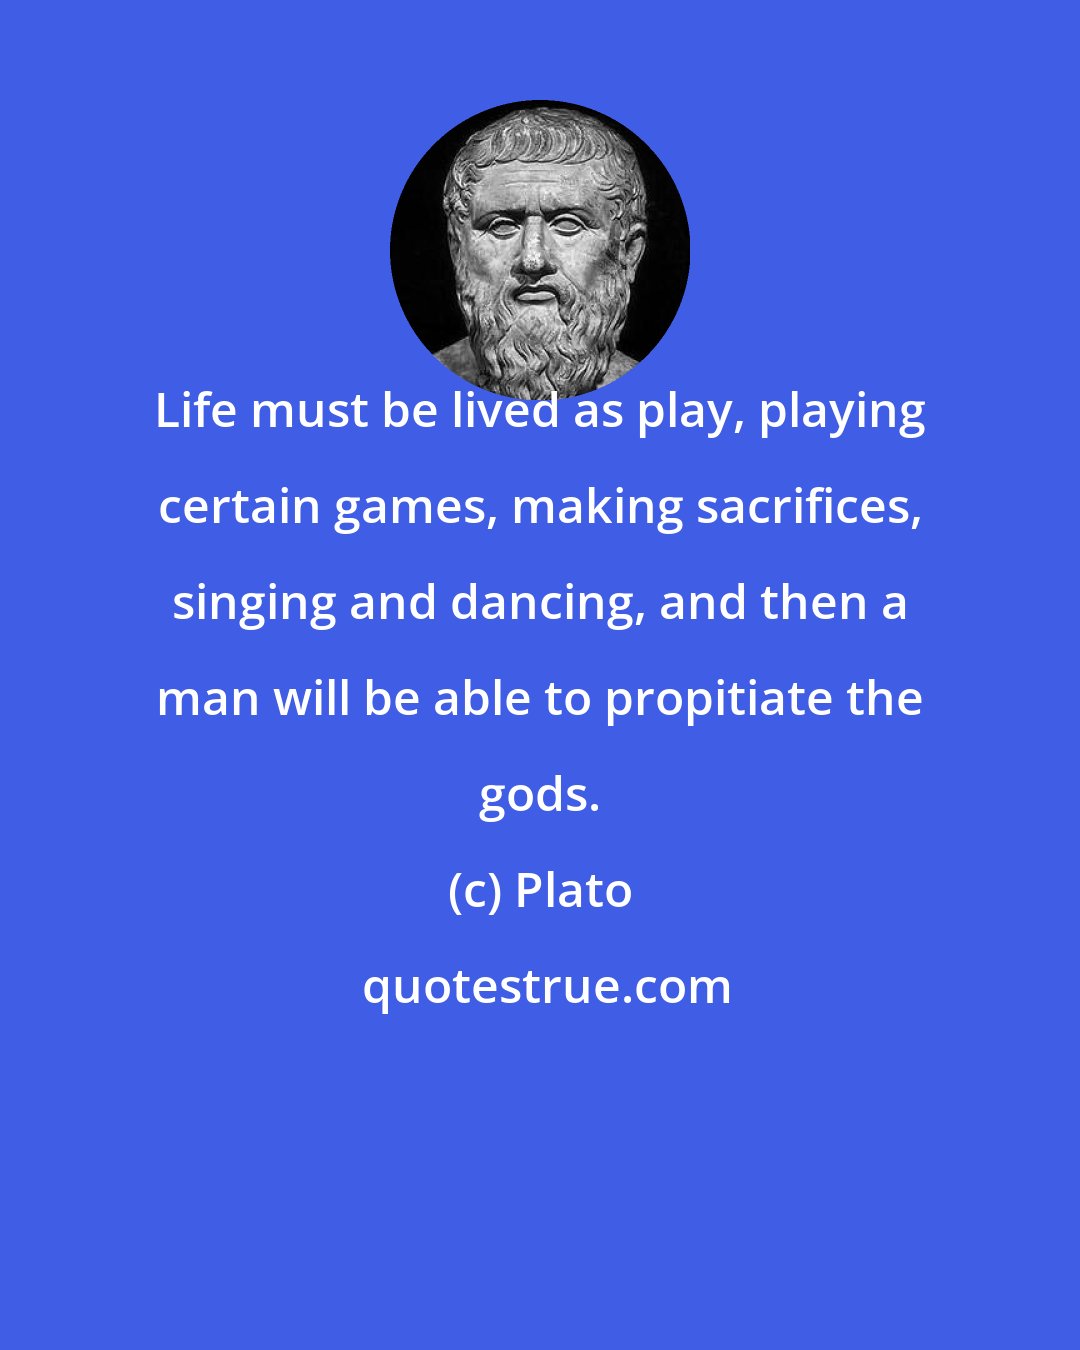 Plato: Life must be lived as play, playing certain games, making sacrifices, singing and dancing, and then a man will be able to propitiate the gods.